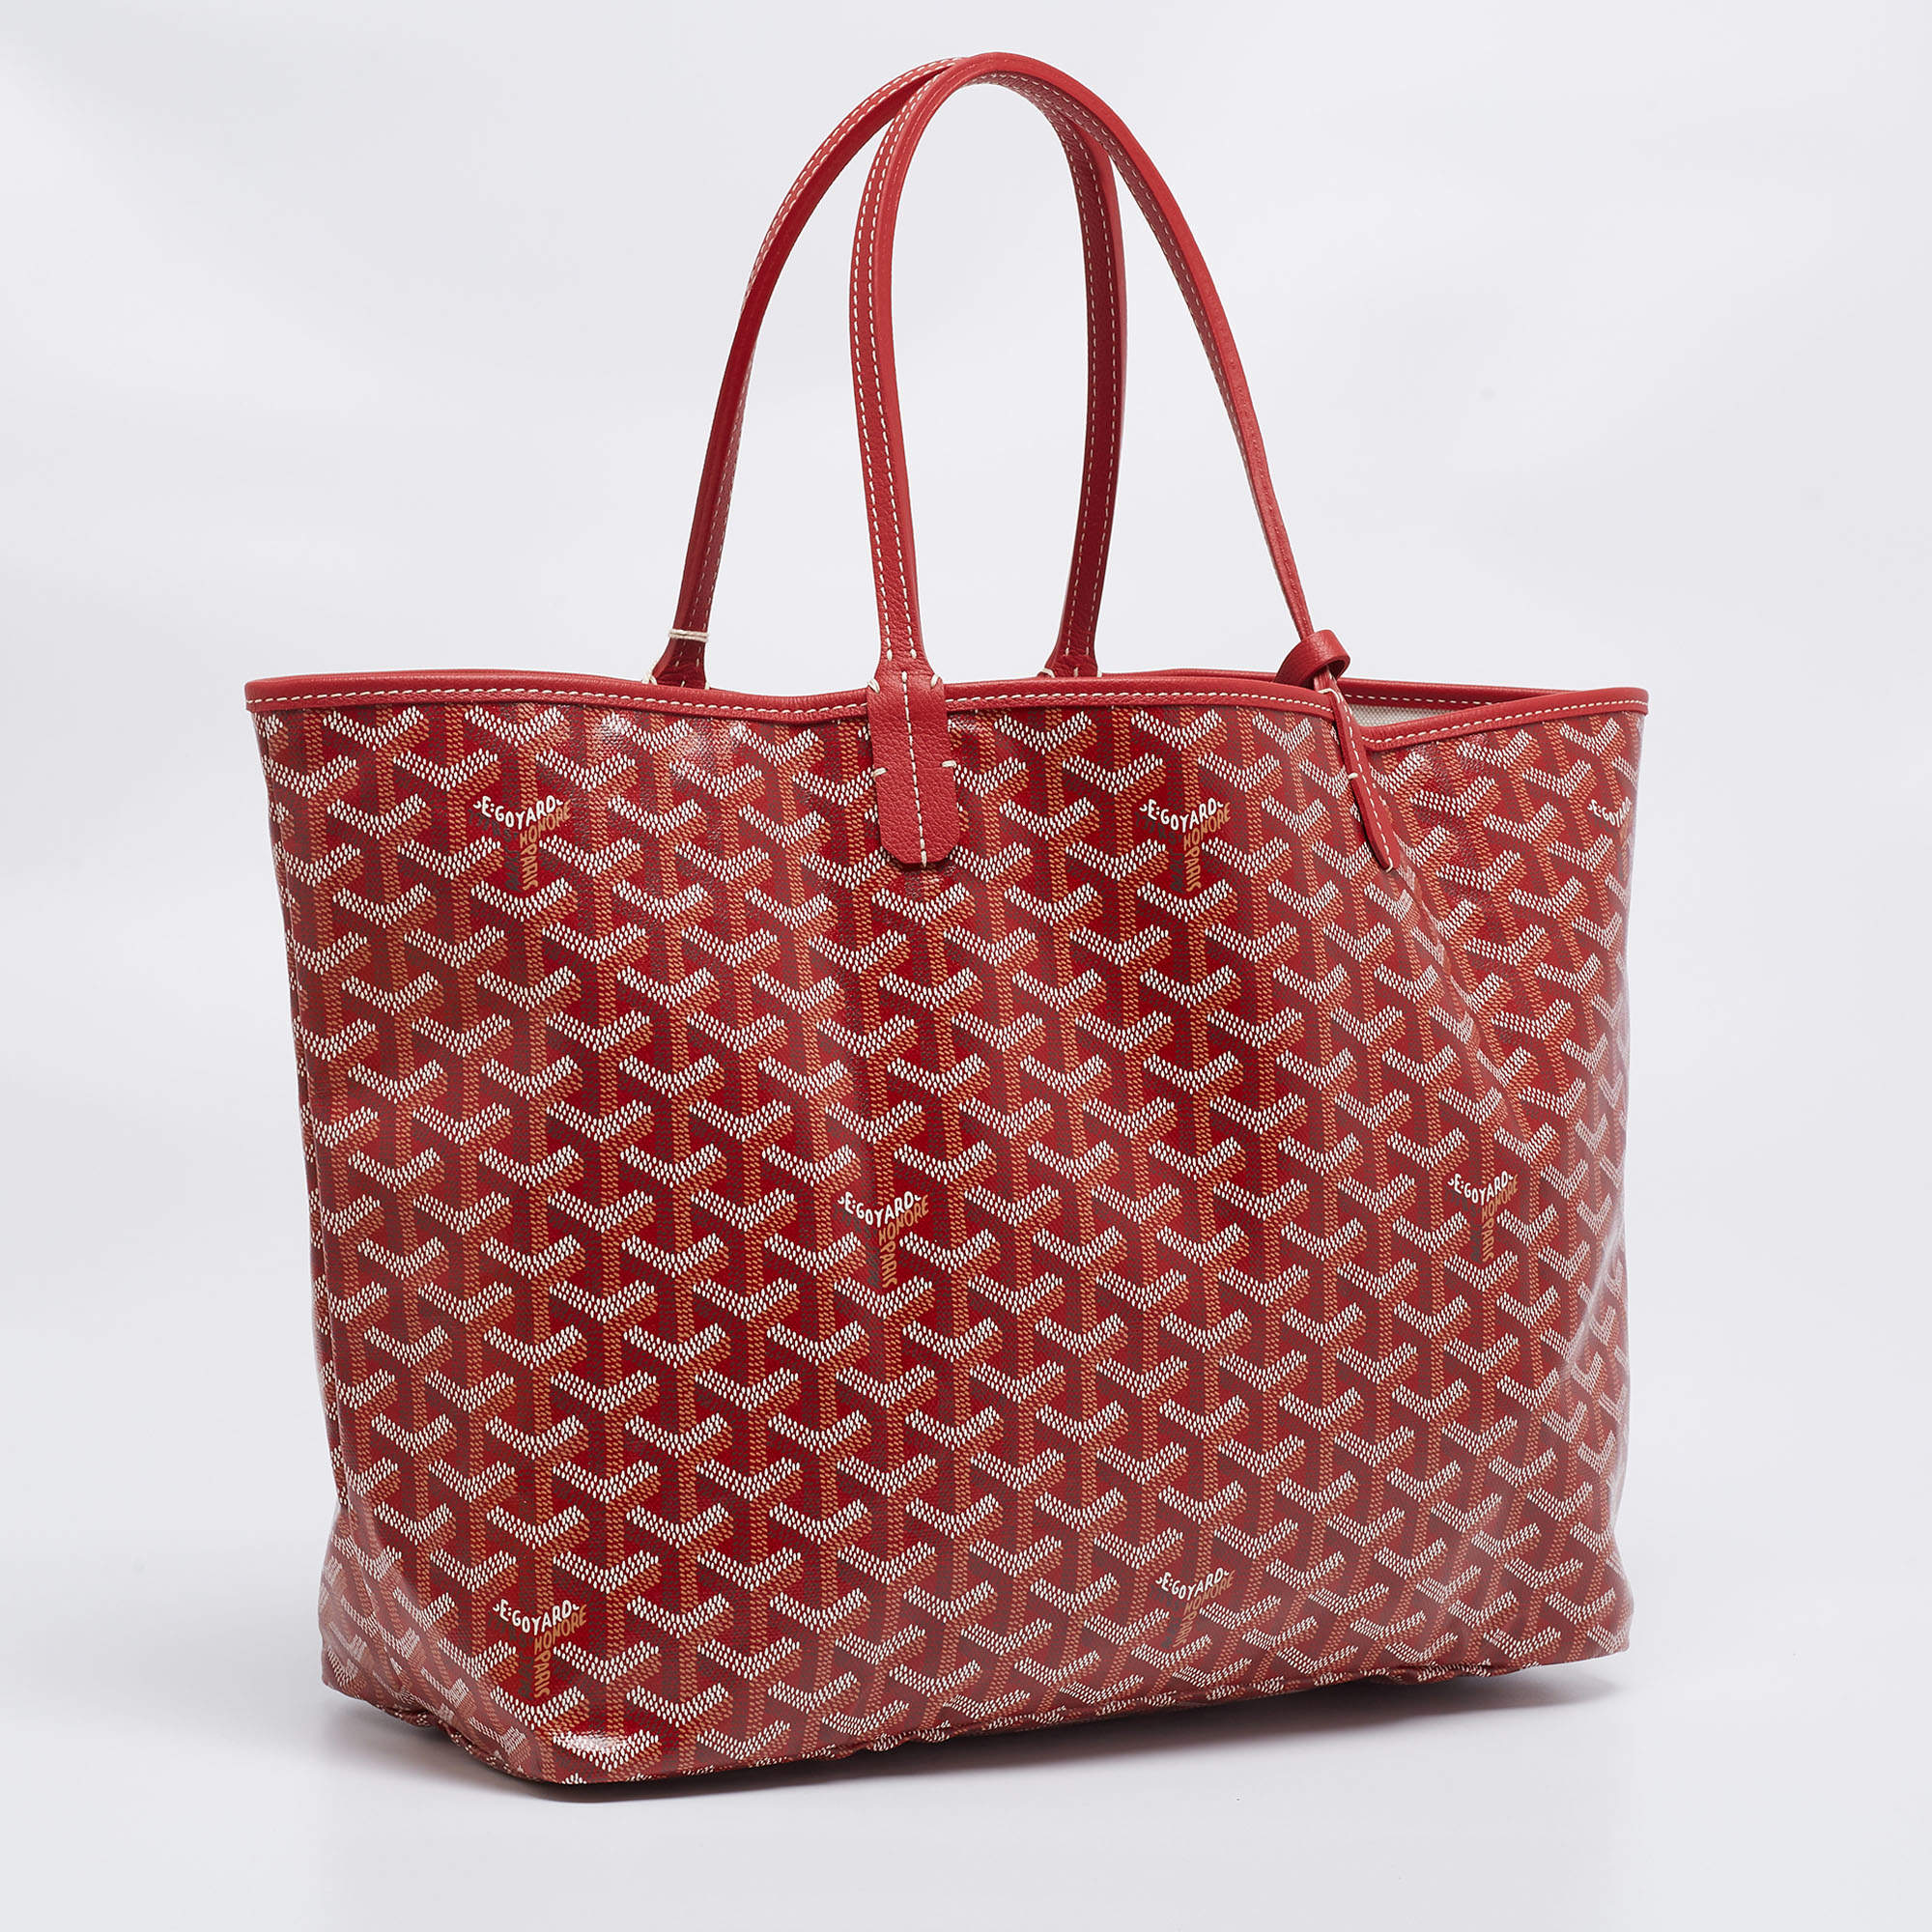 GOYARD GOYARD Saint Louis PM Tote Bag MIA02025 leather Coated canvas Red  Used unisex MIA02025｜Product Code：2111900203861｜BRAND OFF Online Store